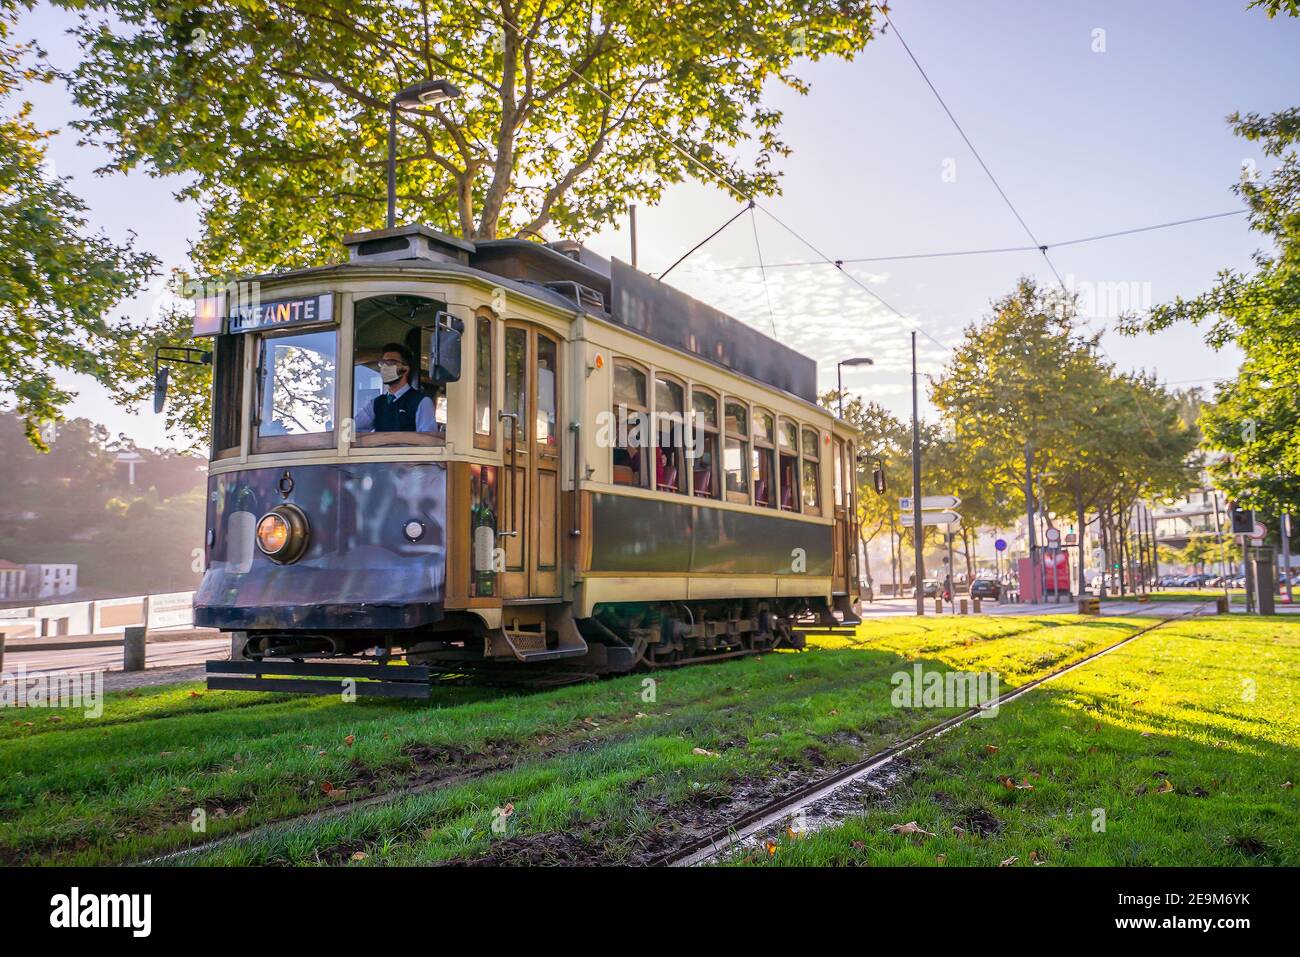 Porto, Portugal - August 12, 2020: Driver wearing mask conducting vintage tram heading city center of Porto by sunset, Portugal Stock Photo